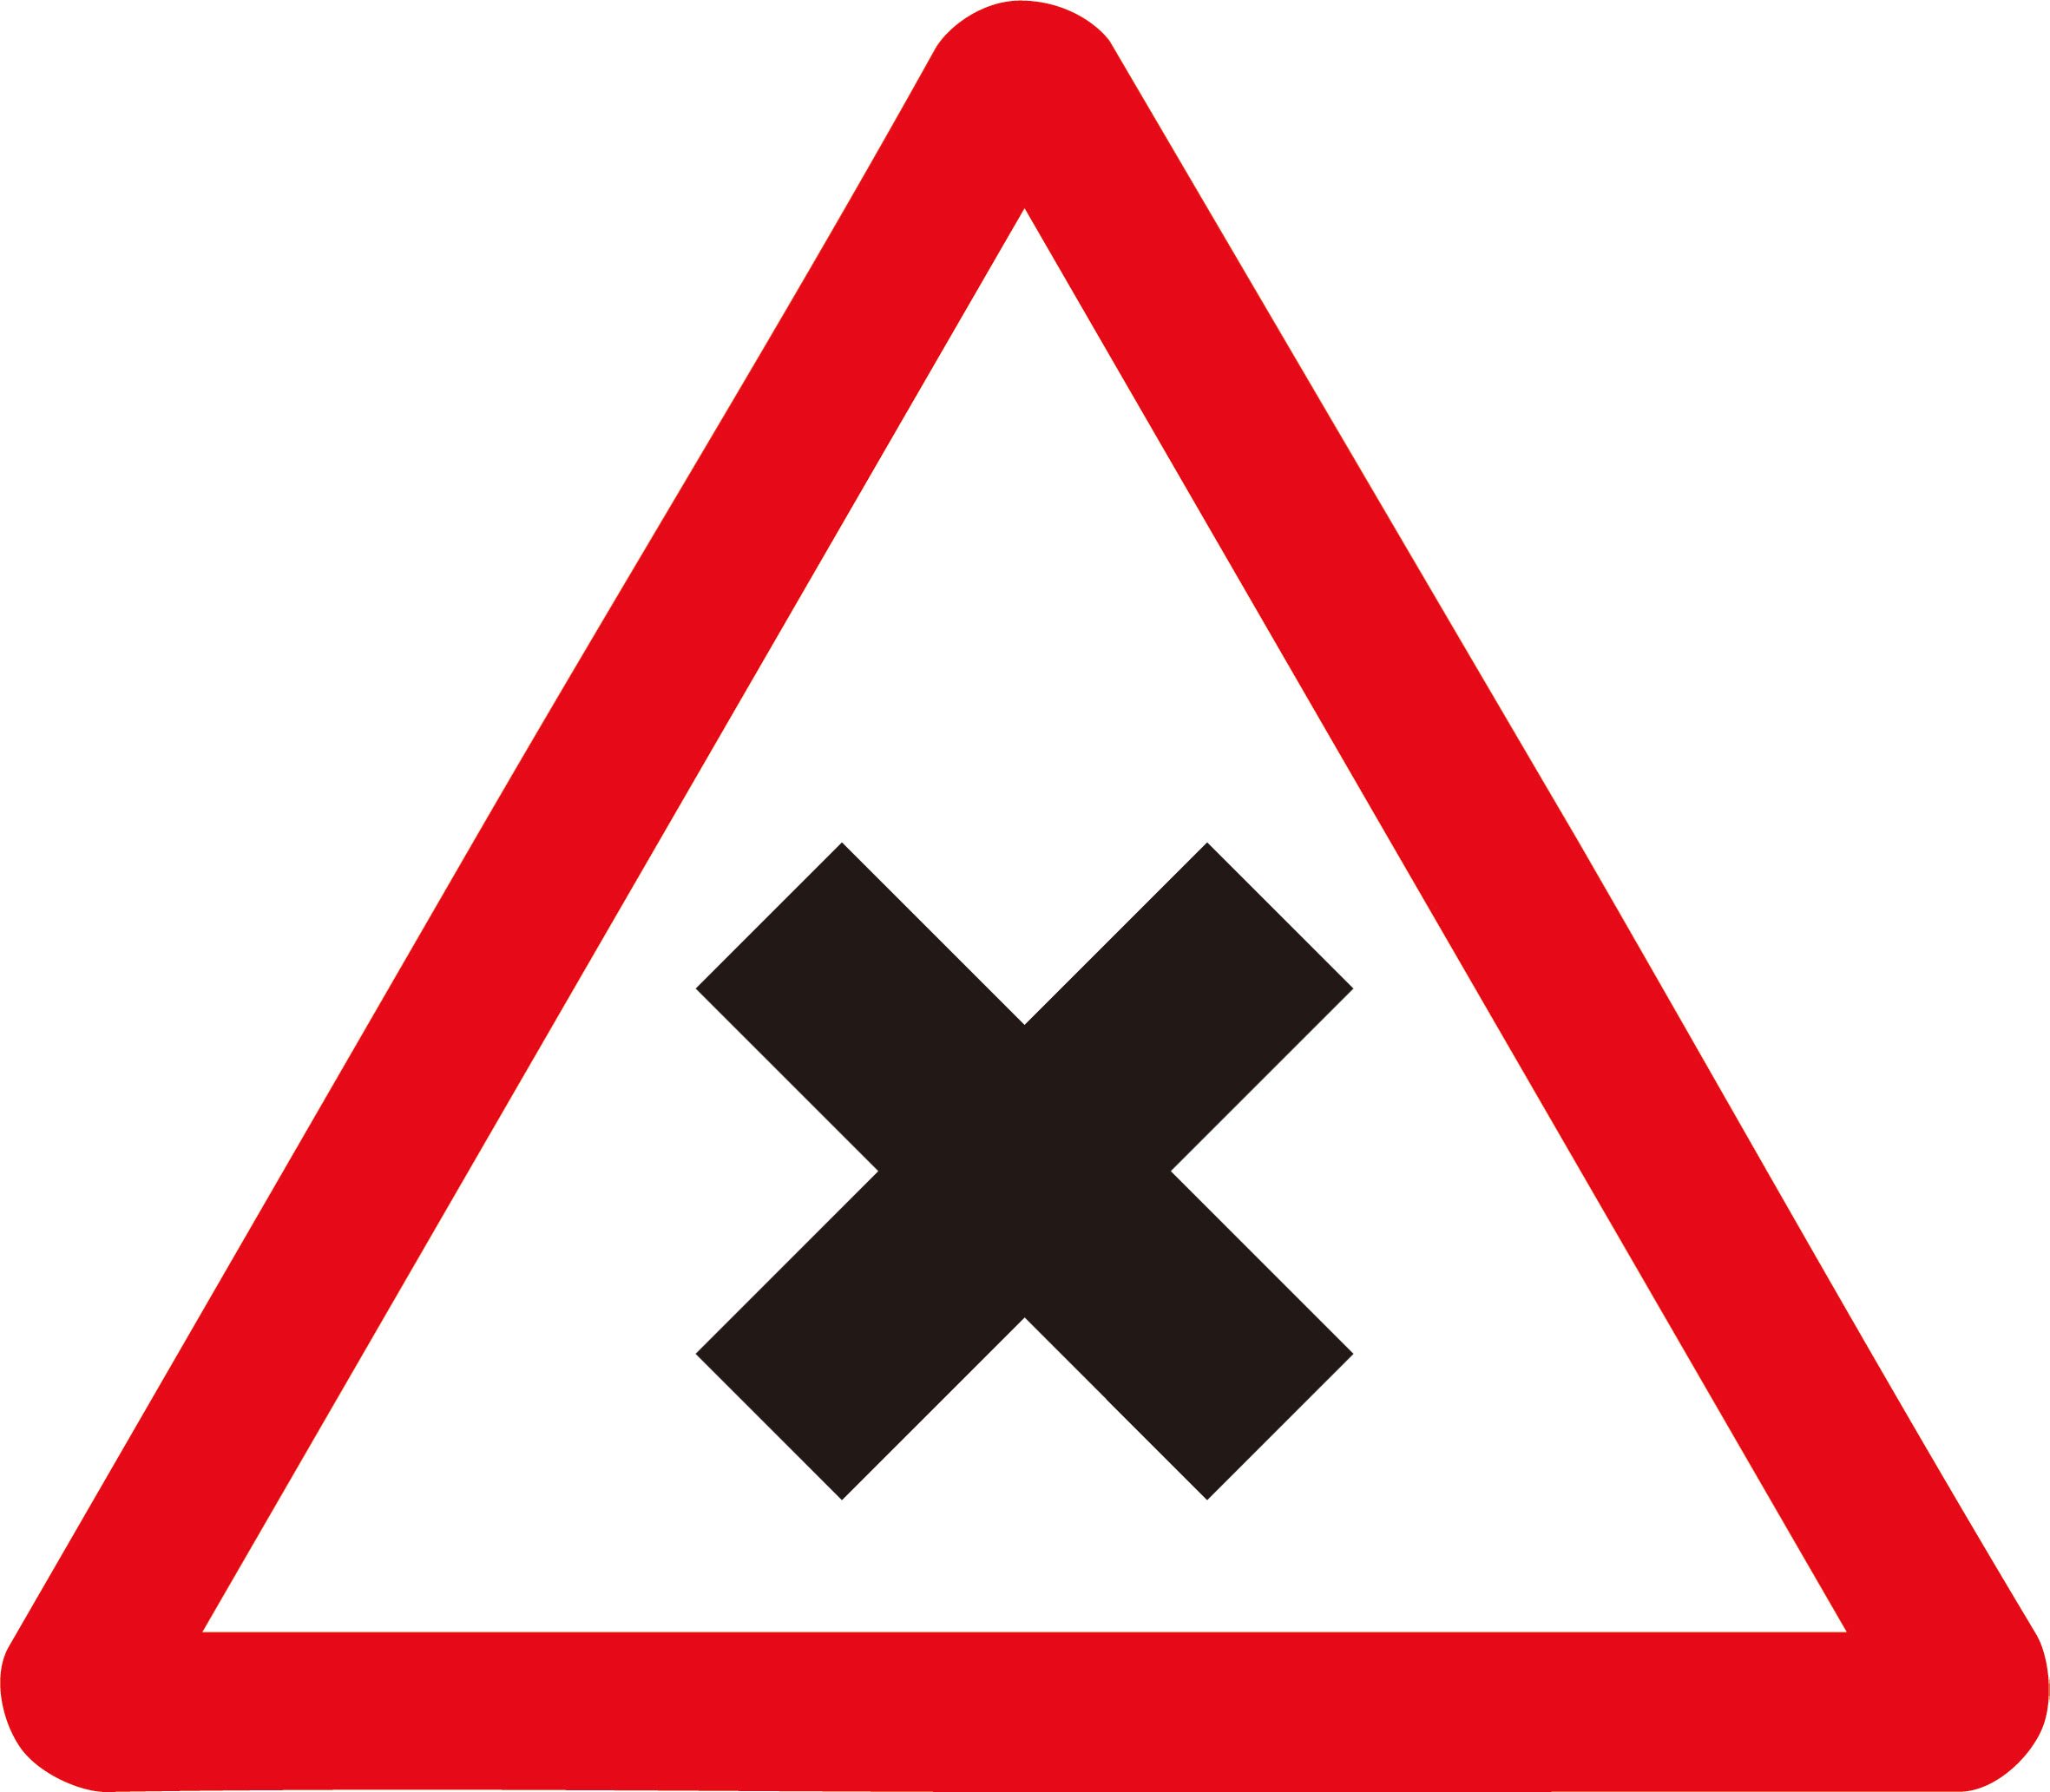 Anti - wind roadway safety traffic signs and symbols by eco ...